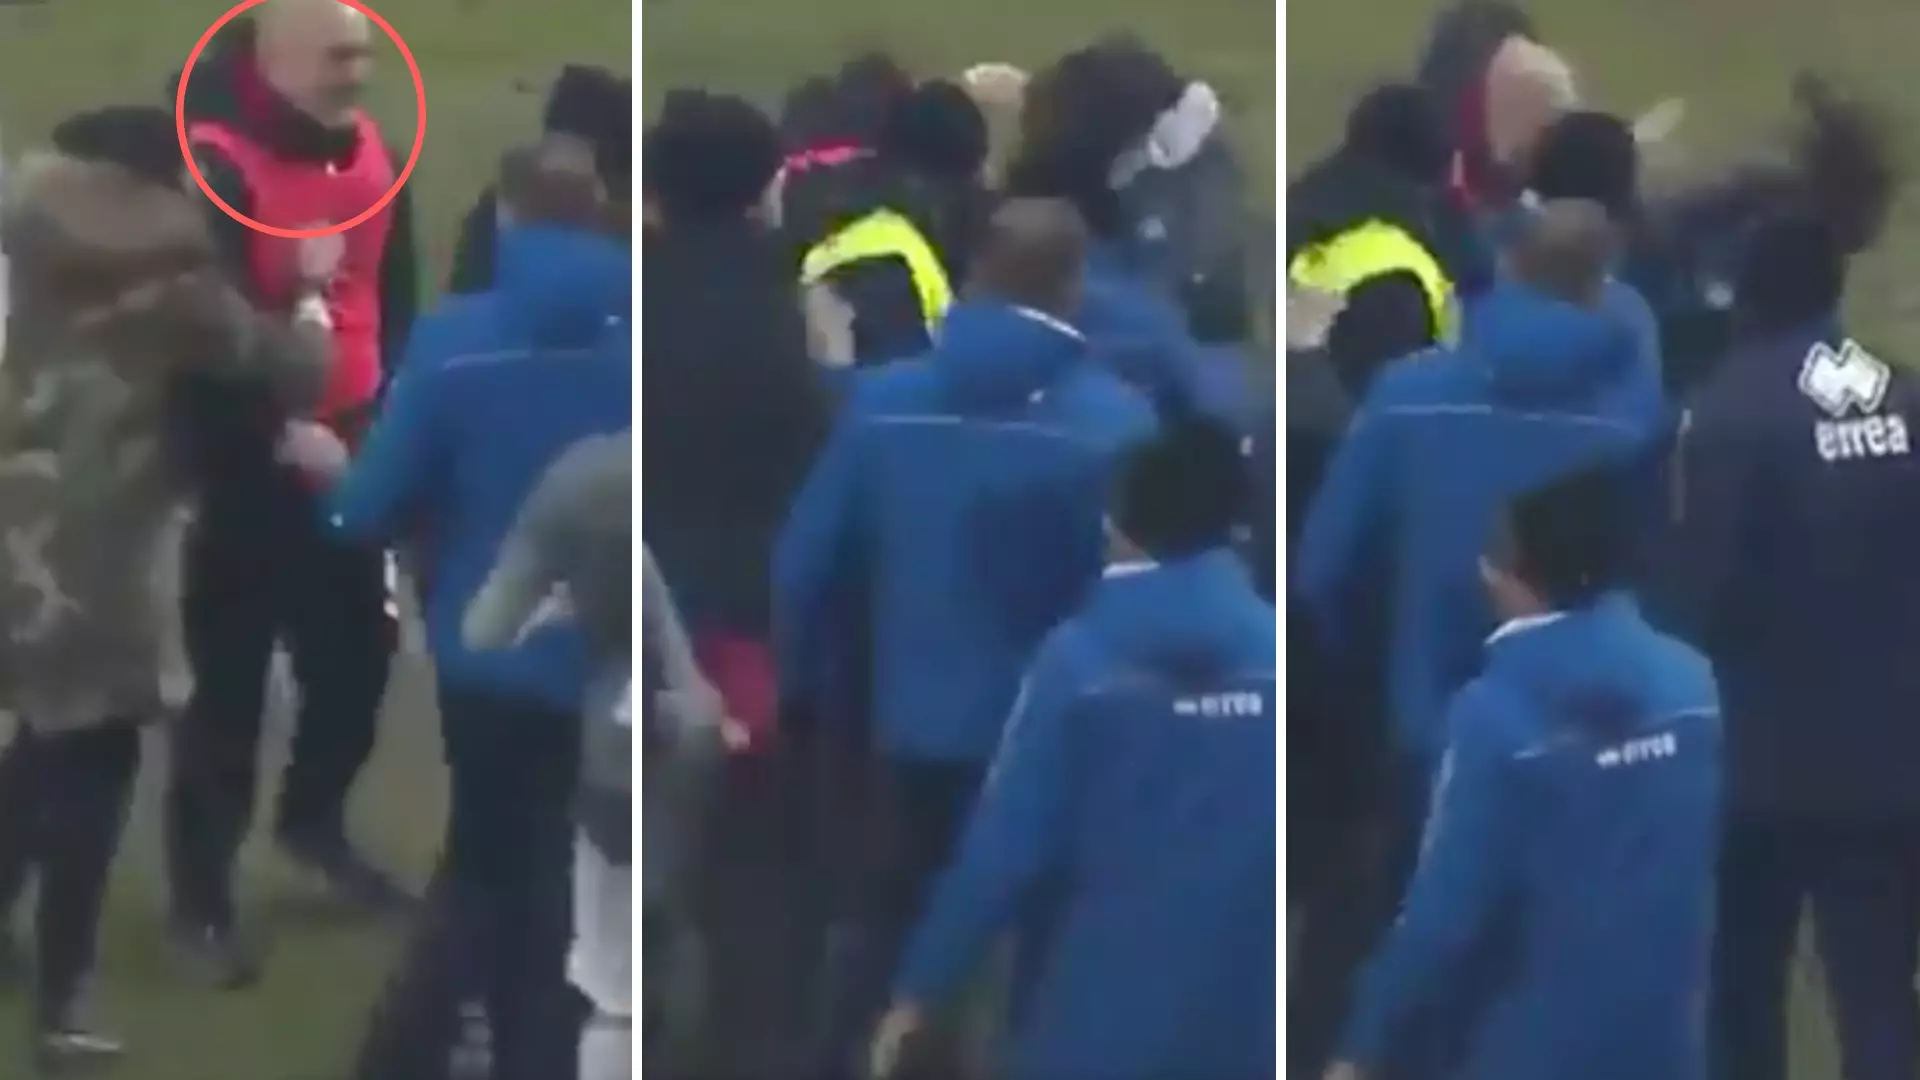 Serie C Manager Handed A Five-Month Ban After Headbutting Rival